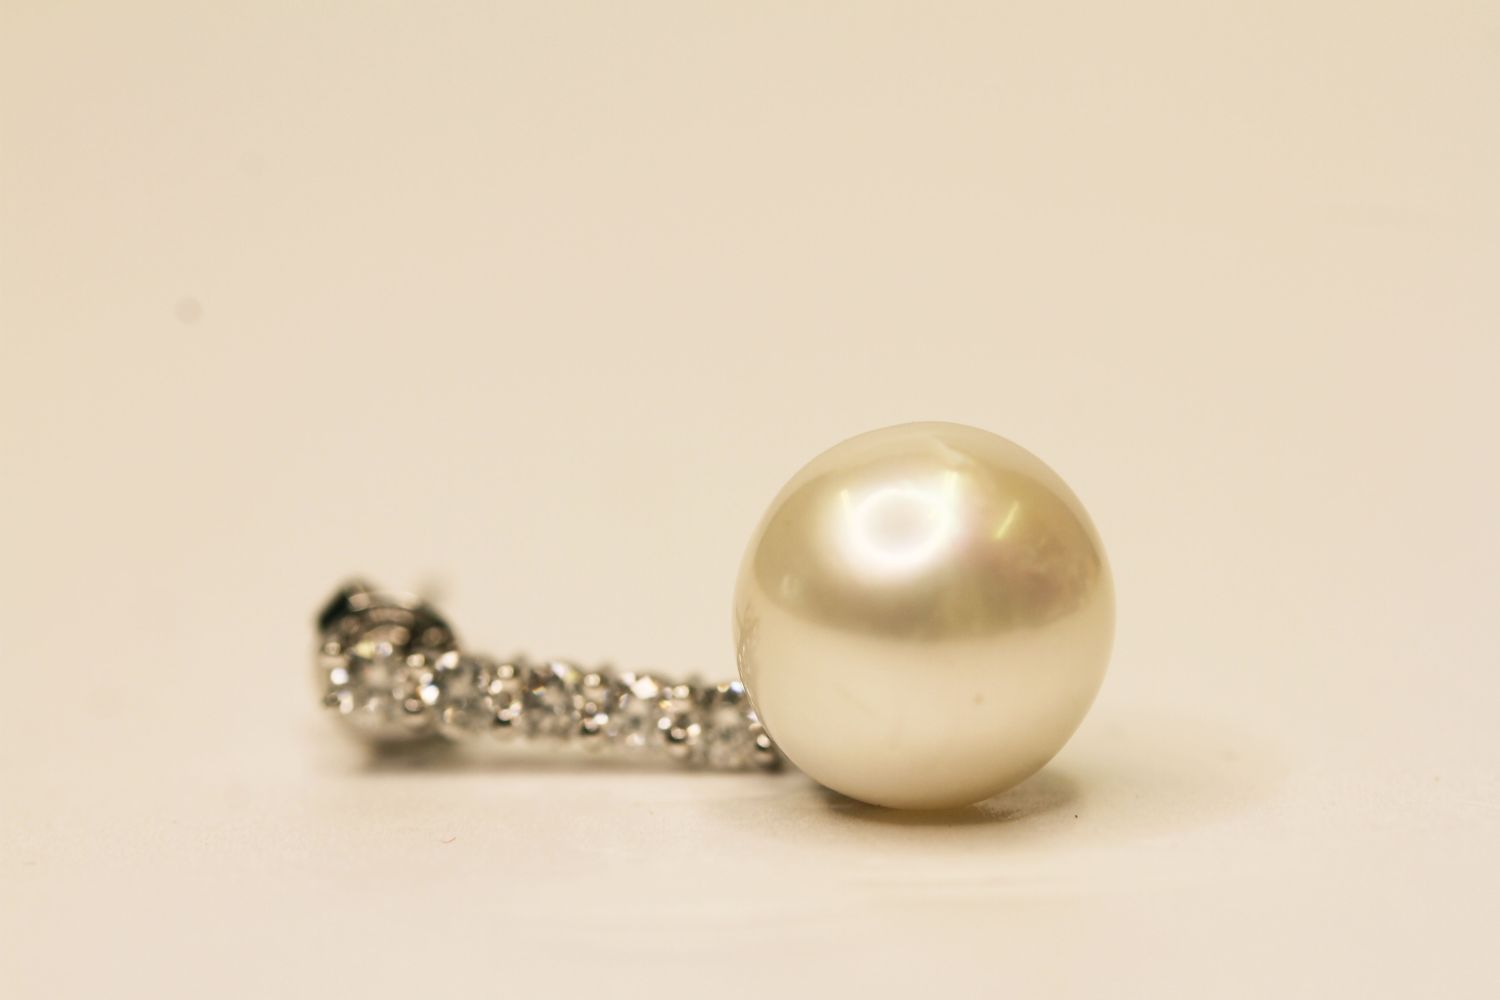 Pair Of Pearl & Diamond Earrings, set with 2 round cultured pearls, 10 round brilliant cut - Image 2 of 5